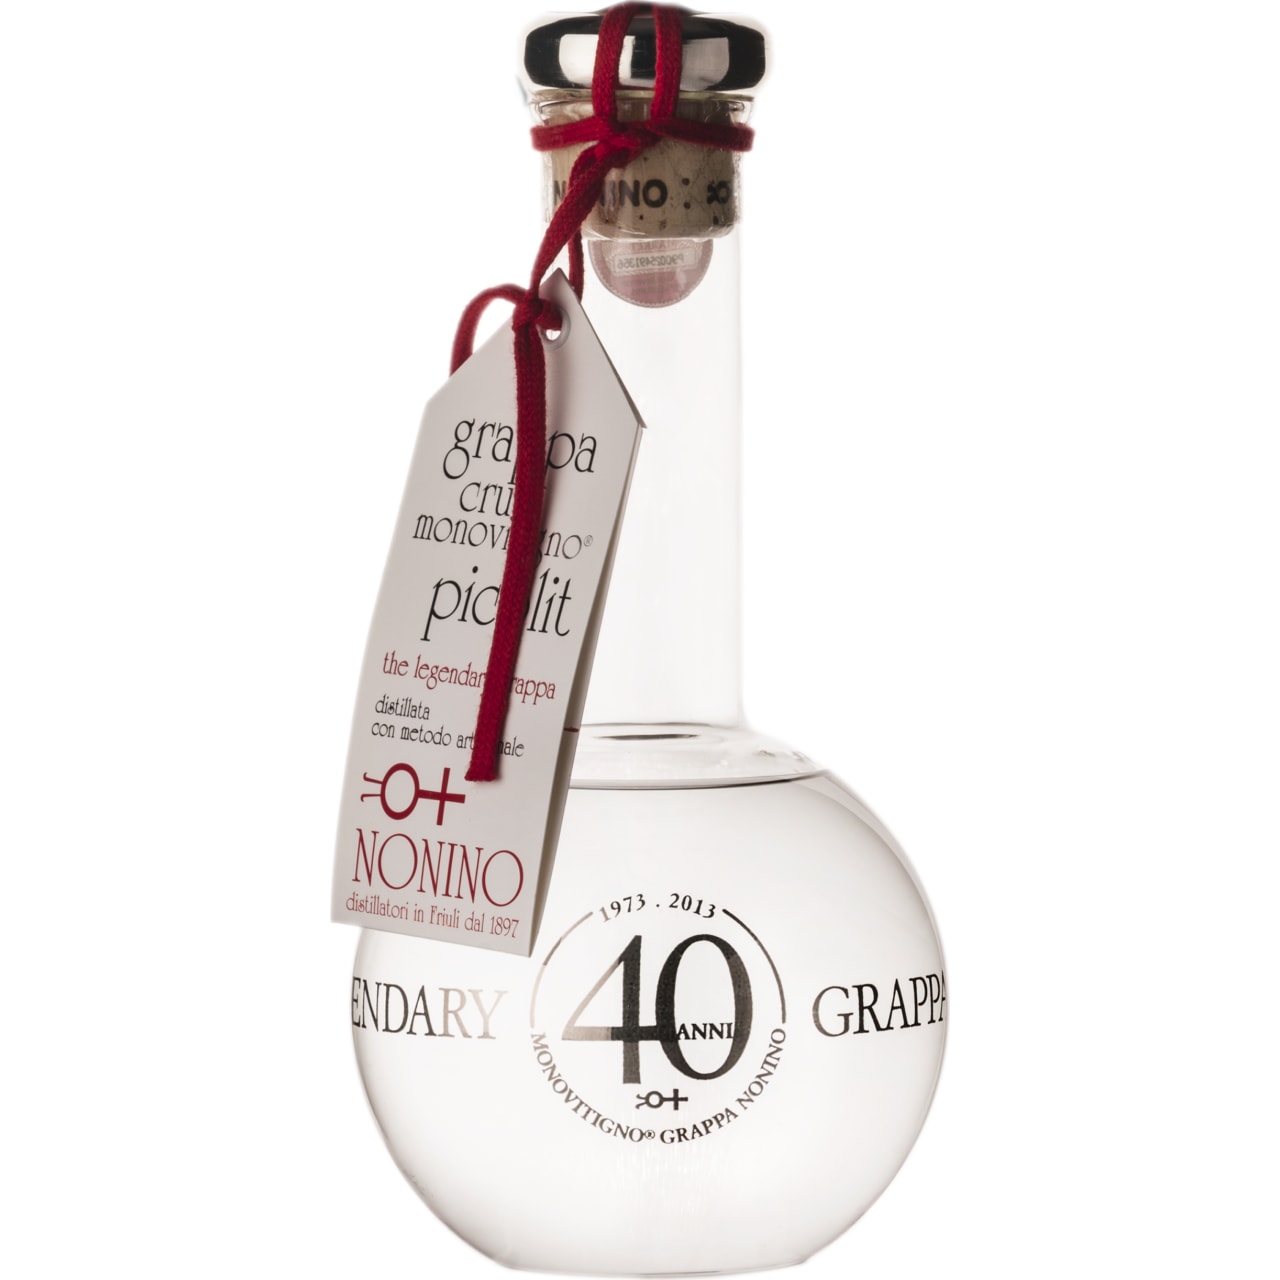 A unique, single Cru Grappa made through the distillation of premium, single-varietal, single-vineyard grape pomace. Produced in limited quantities, this rare grappa is the result of distilling the pomace of select Picolit grapes.